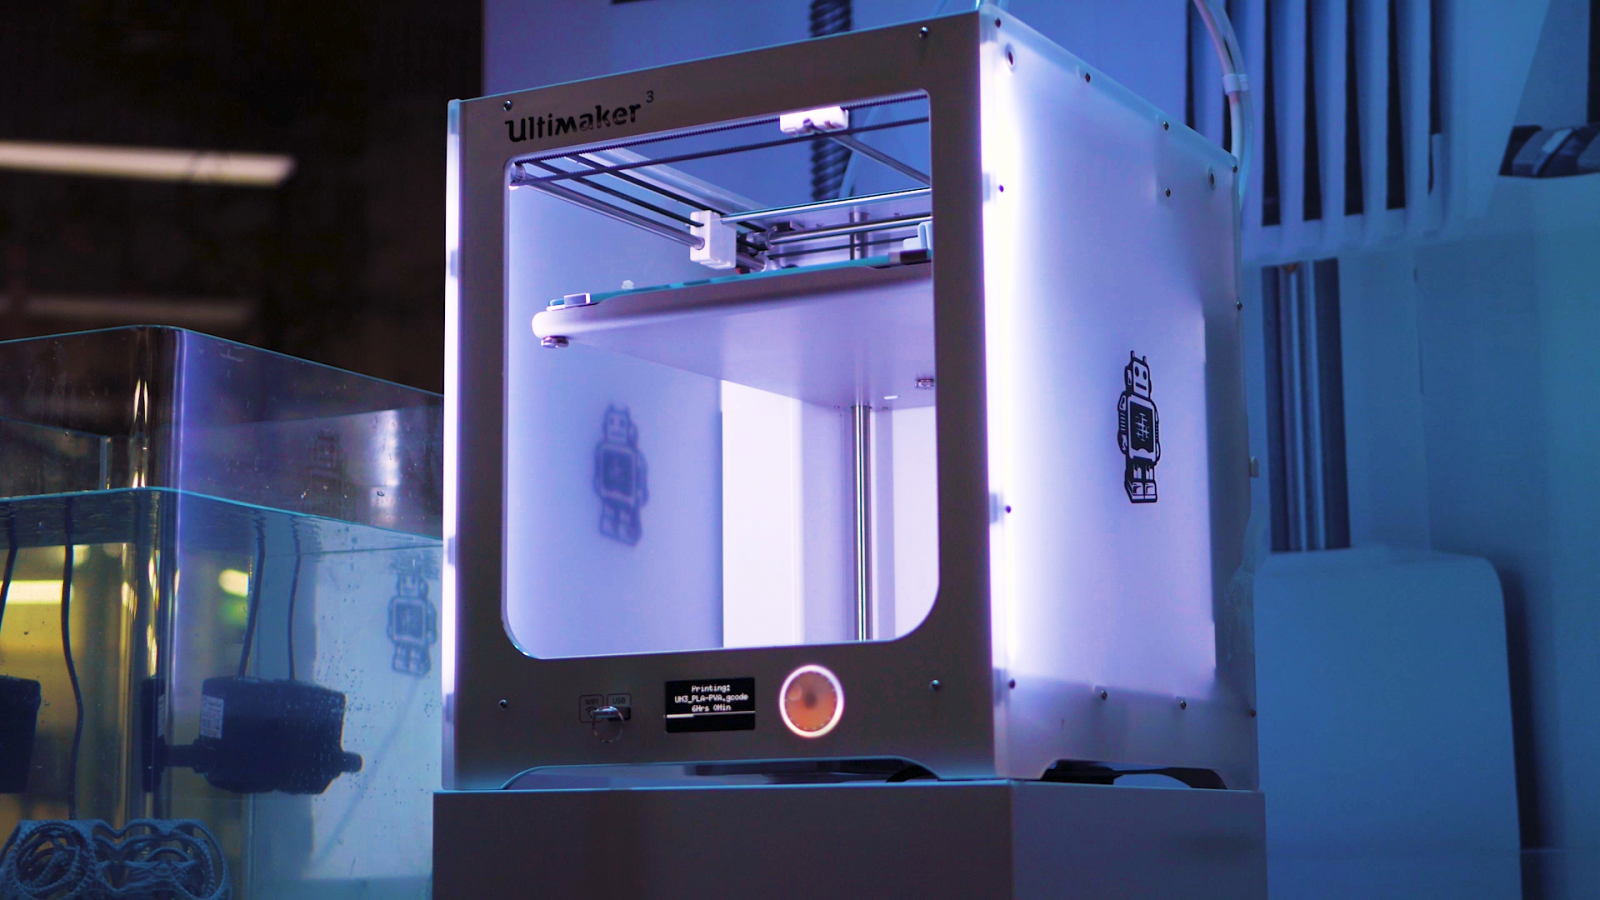 The hype train has finally arrived - this is the Ultimaker 3